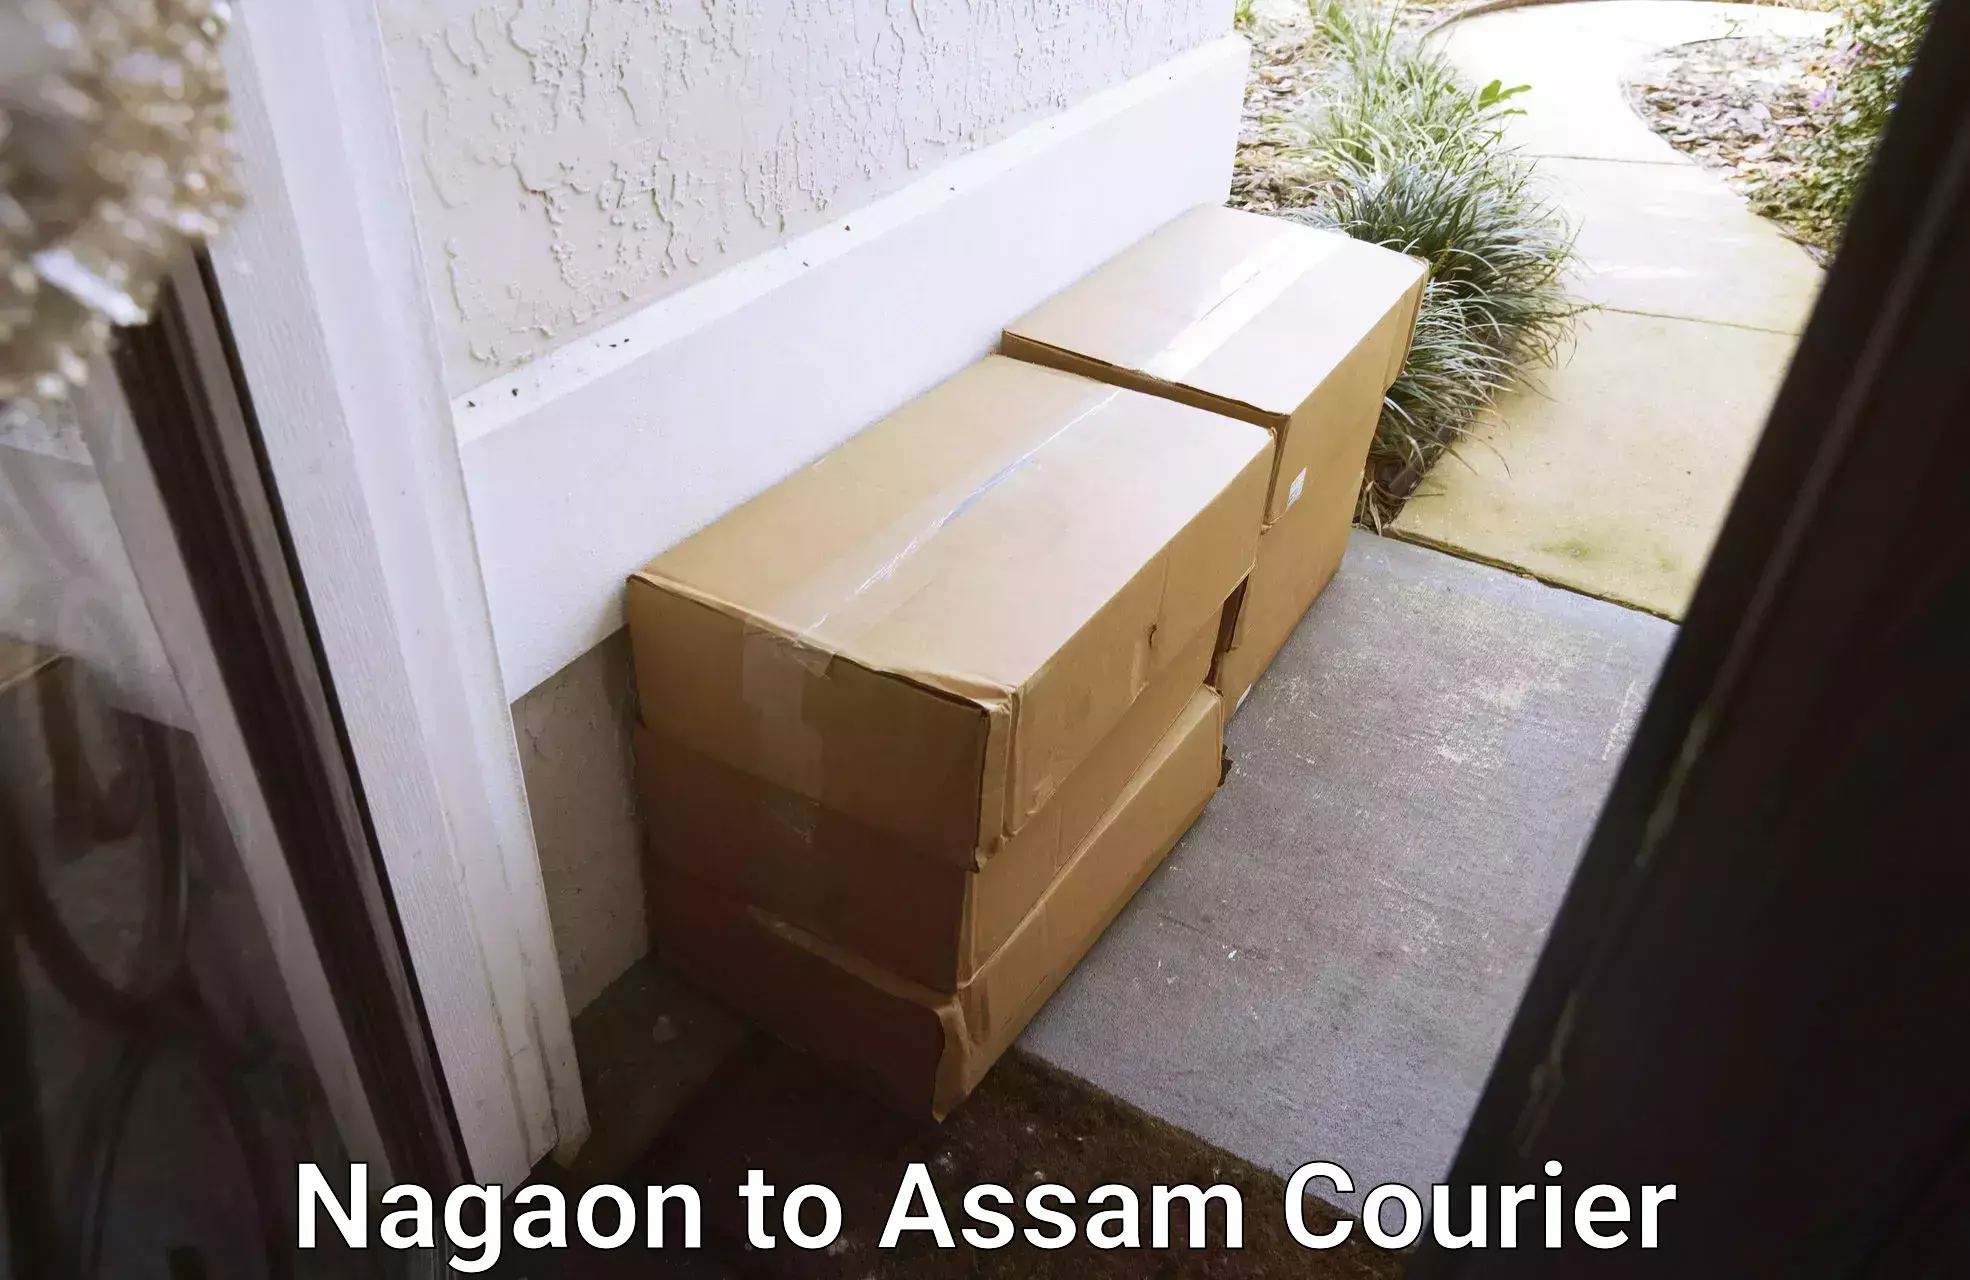 On-call courier service Nagaon to Kampur